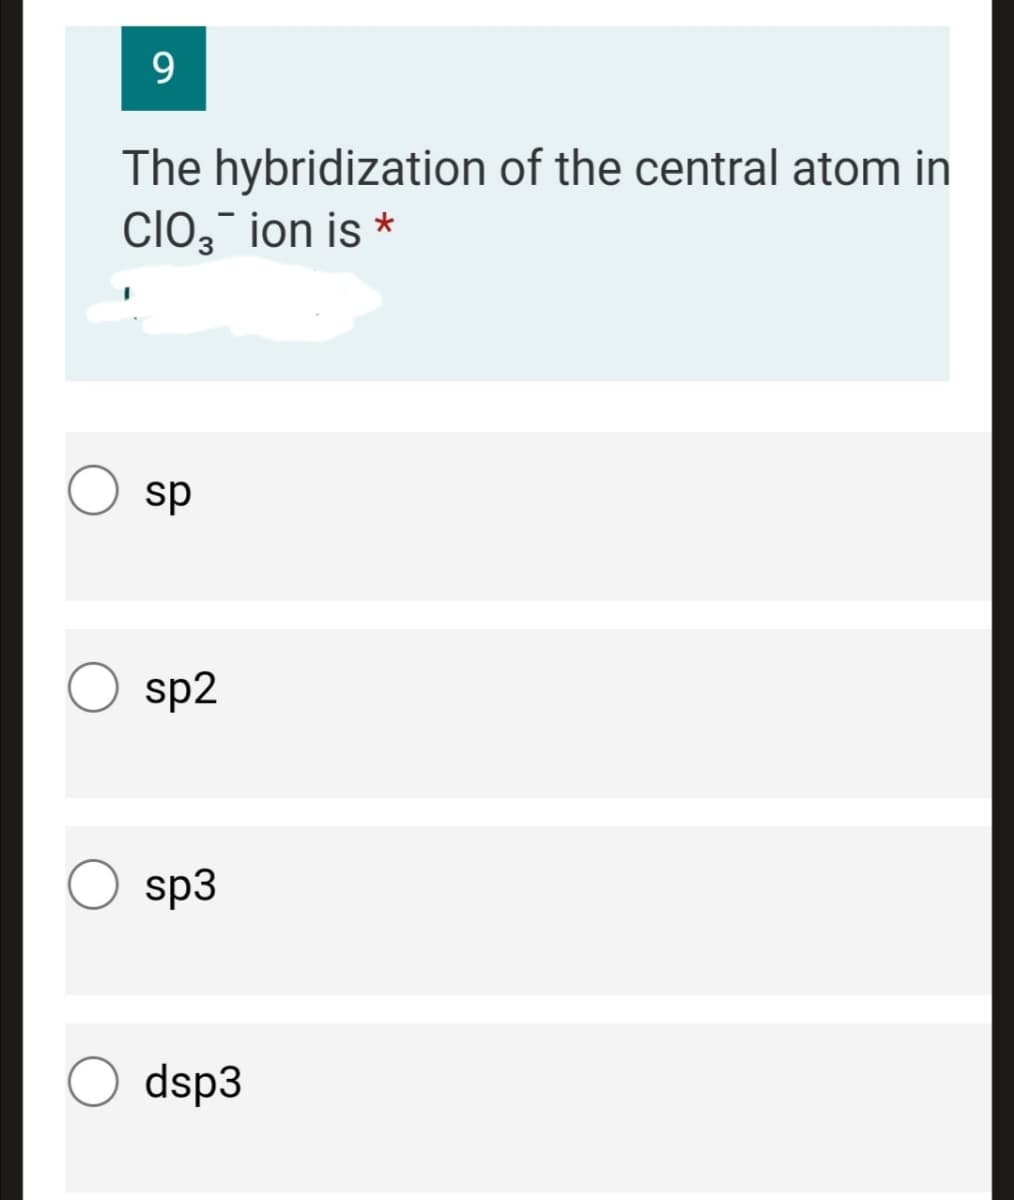 9.
The hybridization of the central atom in
Clo, ion is *
sp
sp2
sp3
dsp3
